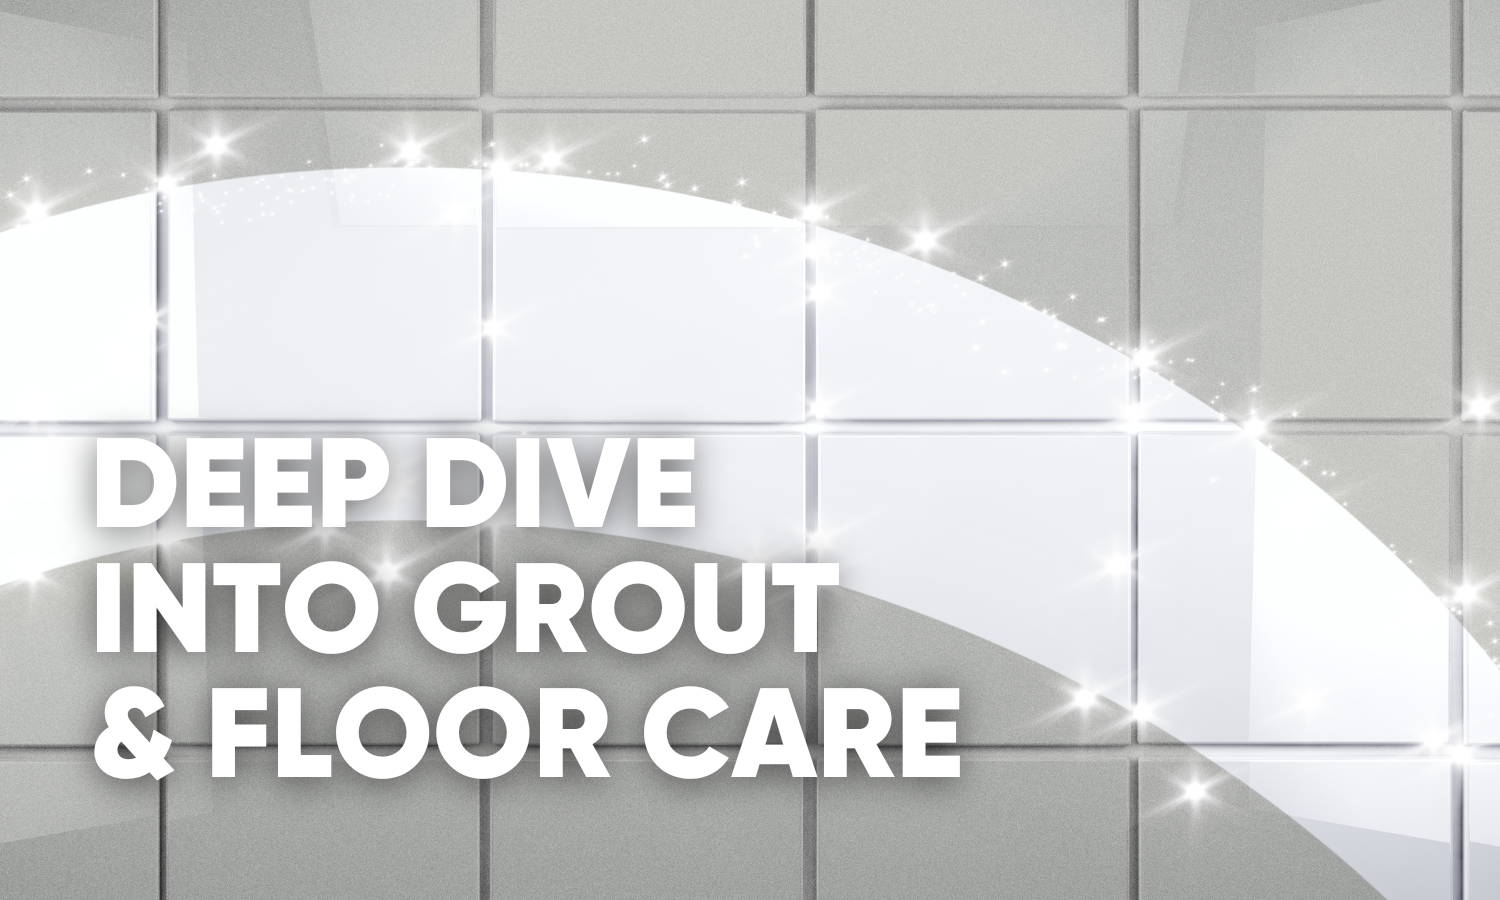 How to Clean Tile and Grout The Right Way